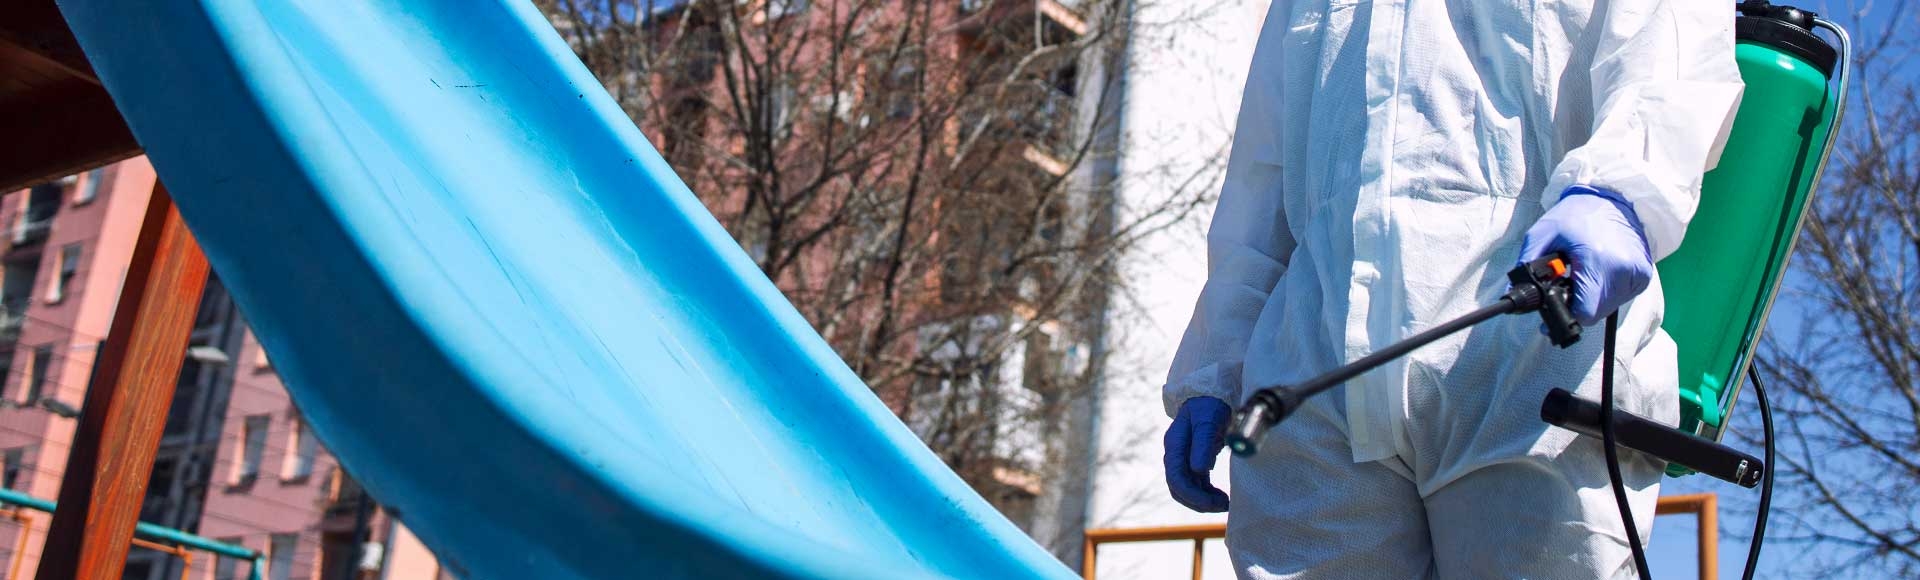 Cleaning Tips For Playground Equipment